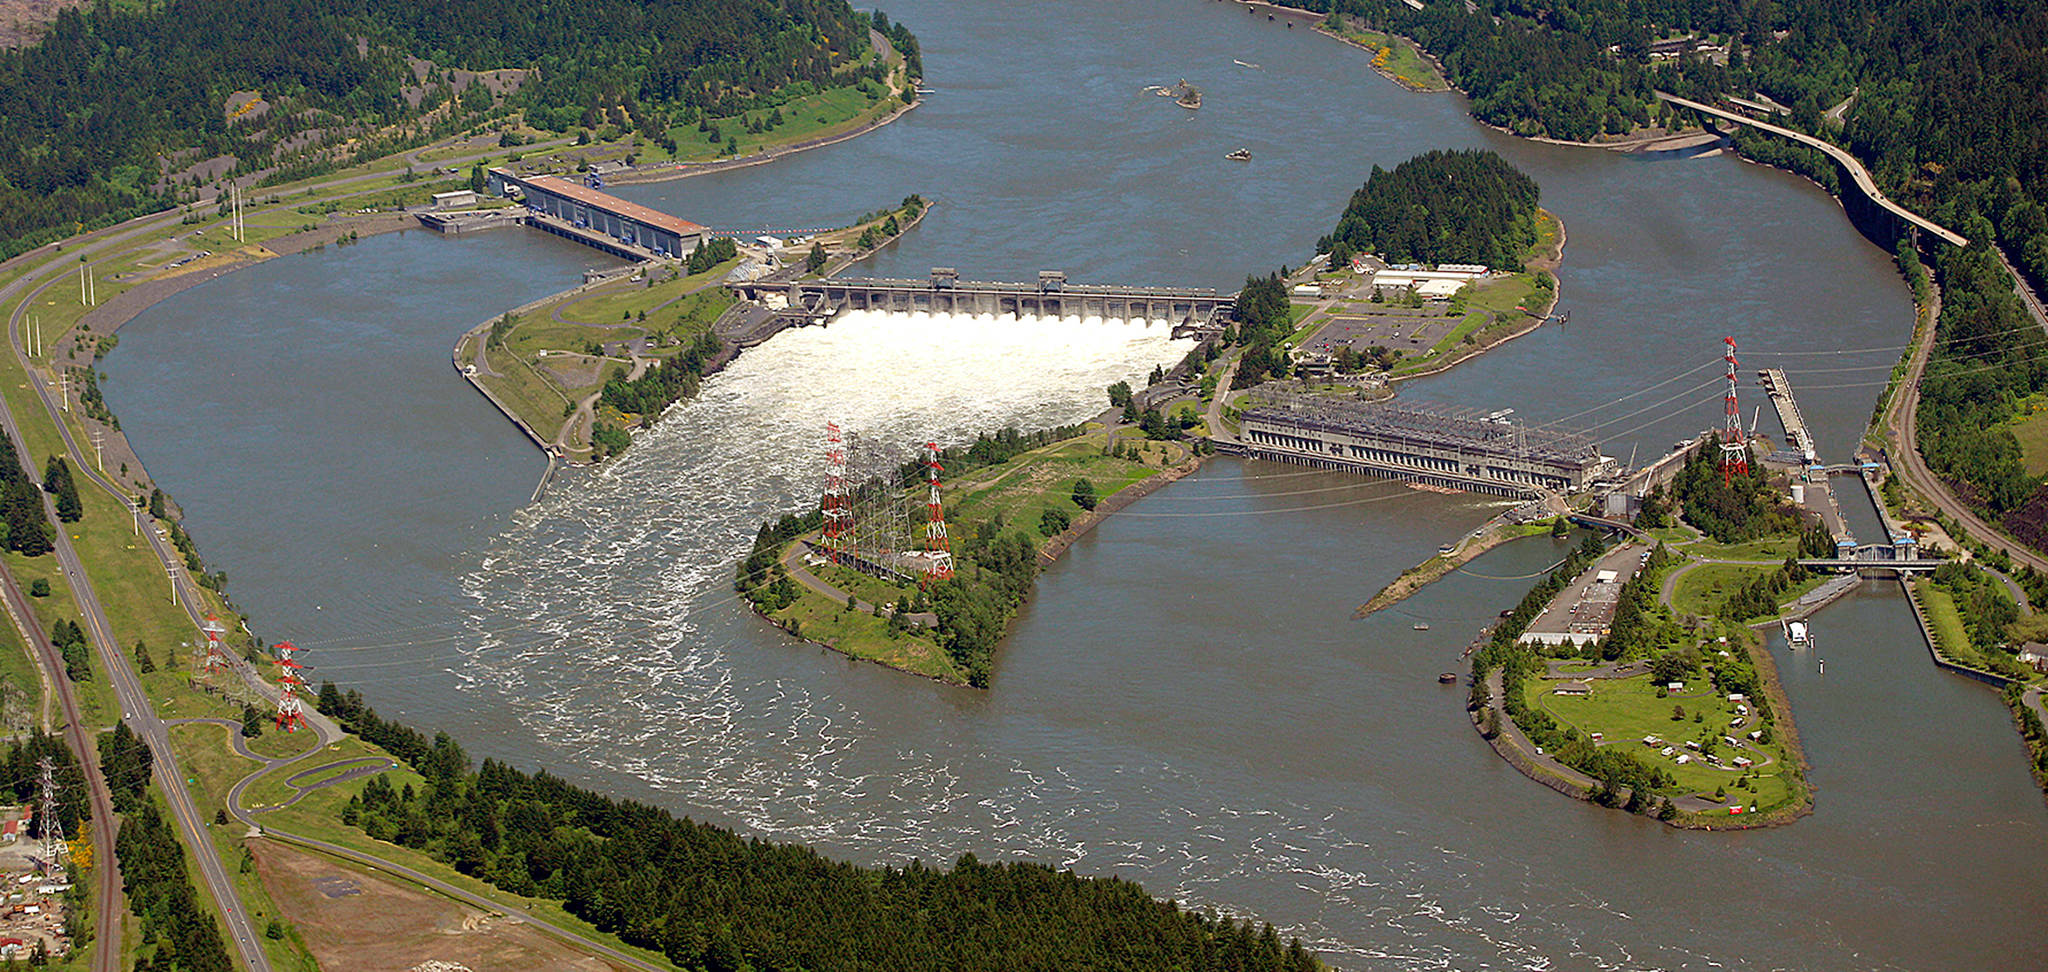 Bonneville Dam on the Columbia River near Cascade Locks, Oregon, is one of many dams which provide the majority of electricity that the Bonneville Power Administration sells to local utilities like the Snohomish County Public Utility District. Some of that power, however, is generated by nuclear, coal or natural gas plants. (AP Photo/Rick Bowmer, File)